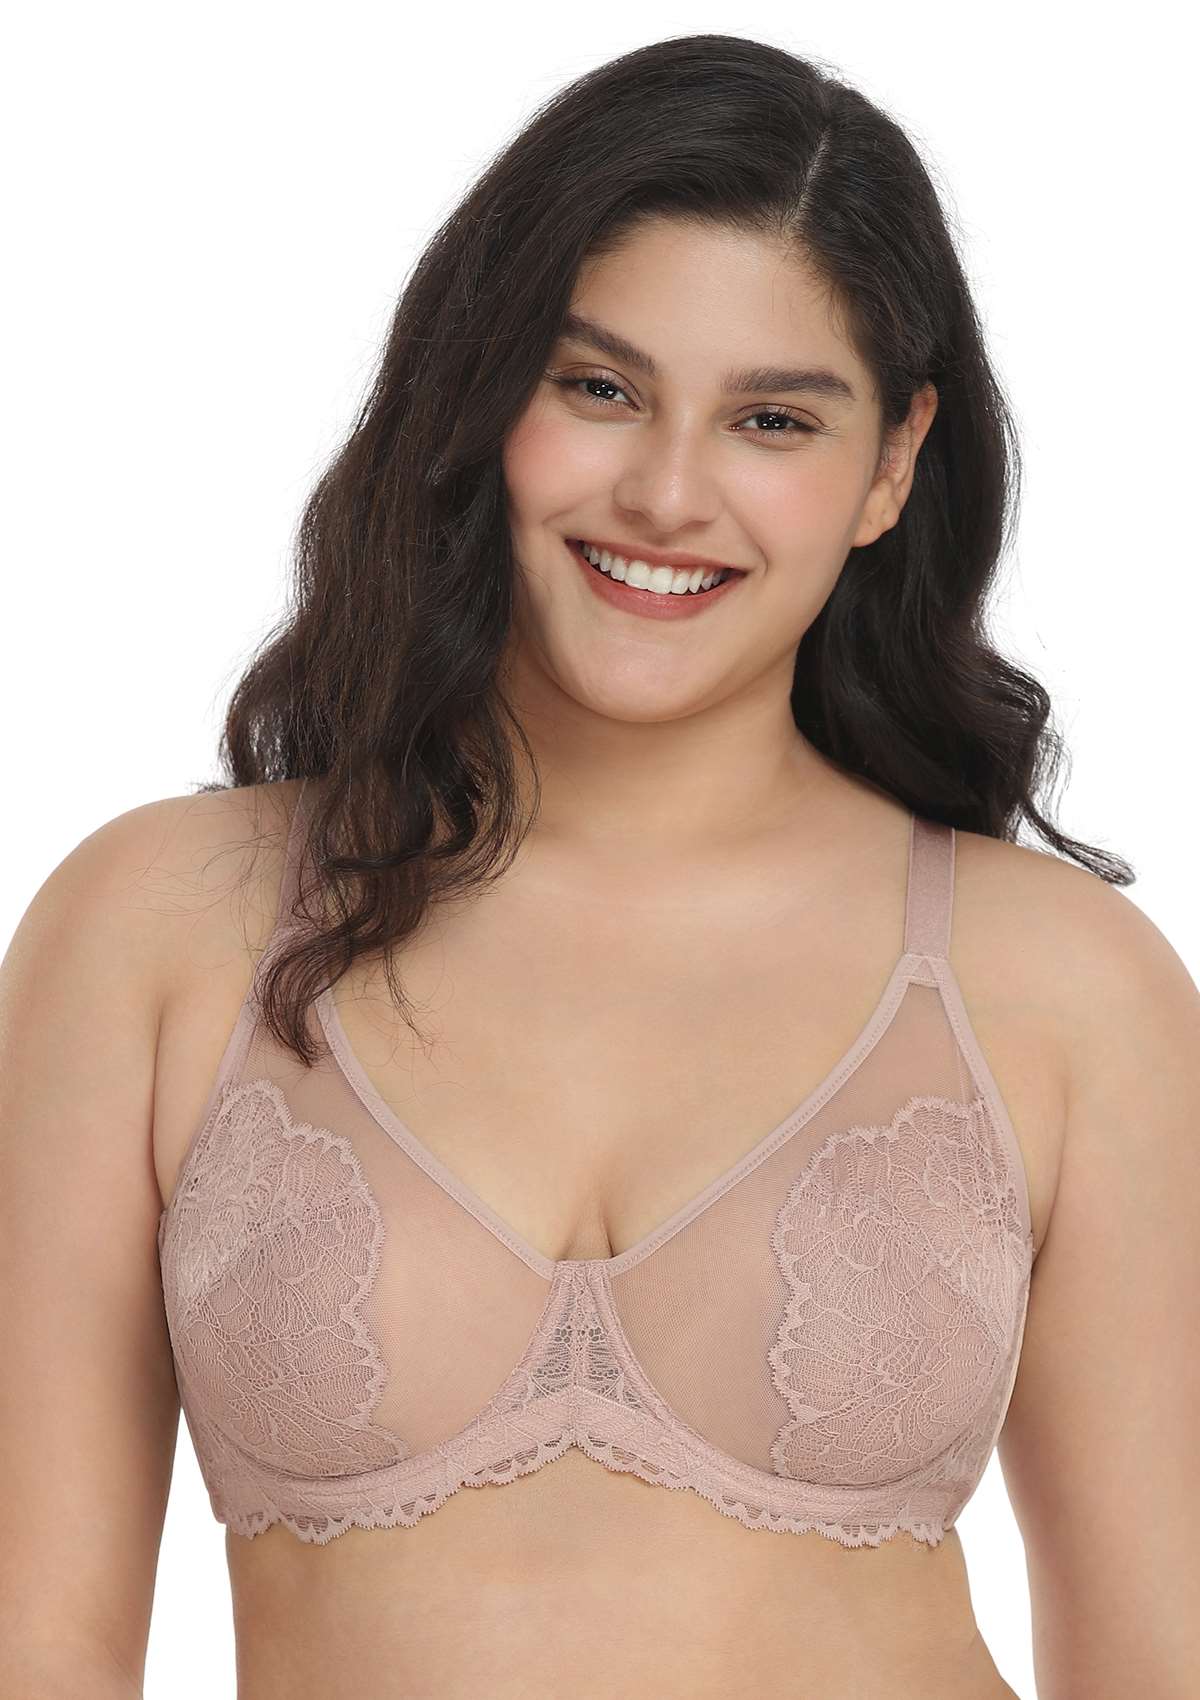 HSIA Blossom Lace Bra And Panties Set: Best Bra For Large Busts - Dark Pink / 46 / C